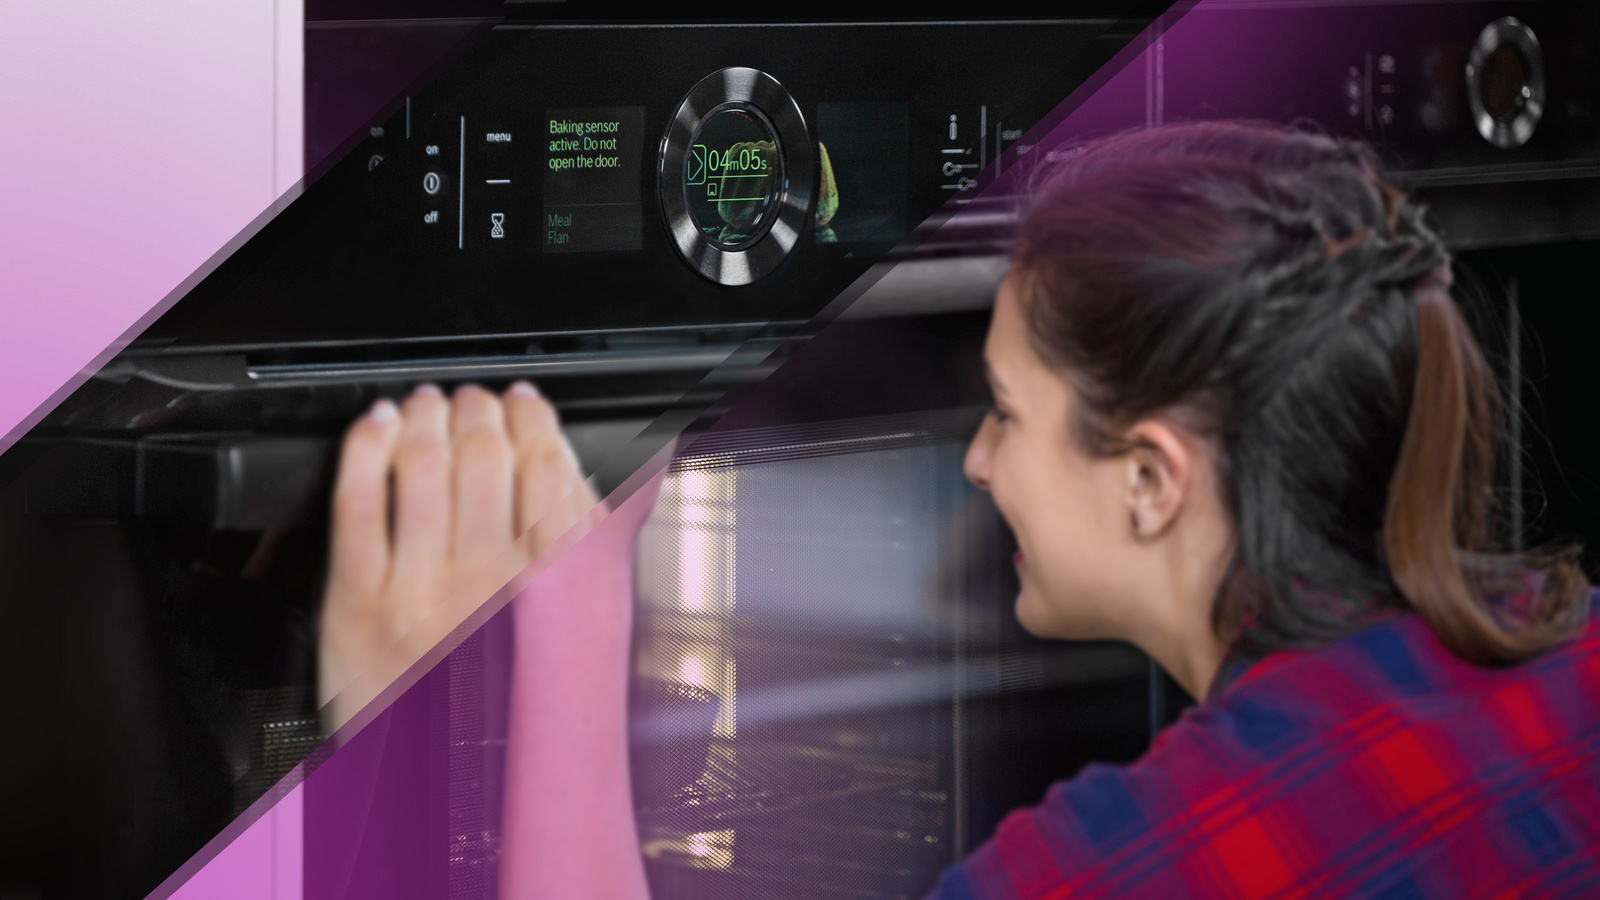 Smart Oven With Artificial Intelligence | Bosch Global